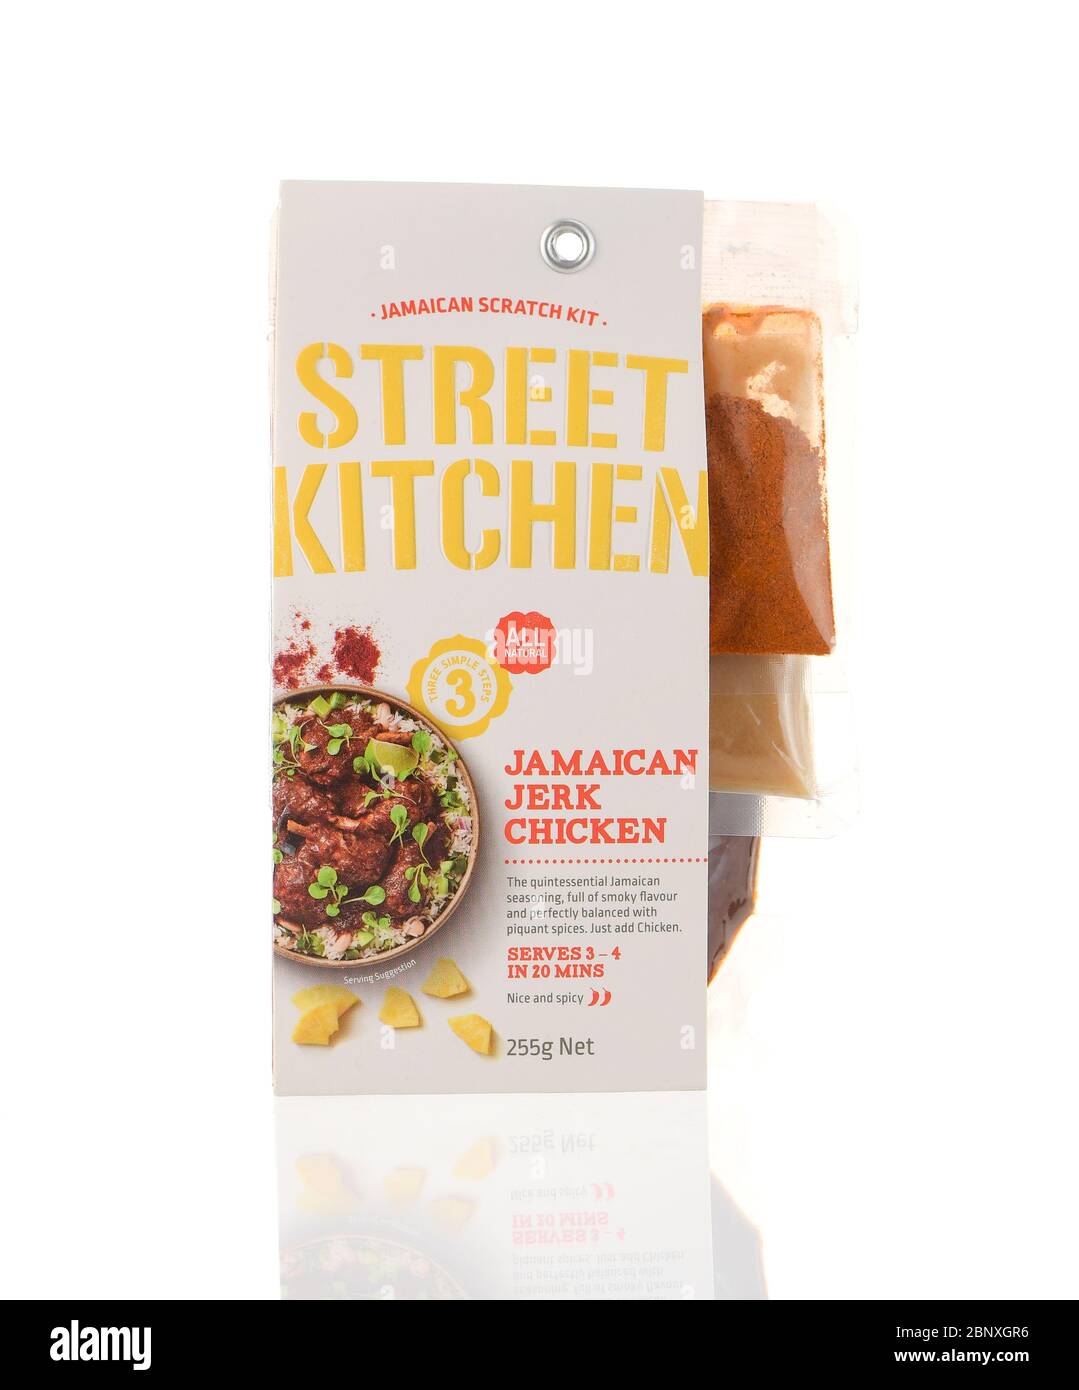 Jamaican scratch kit Street Kitchen jerk chicken simple cooking kit isolated on a white background. Stock Photo